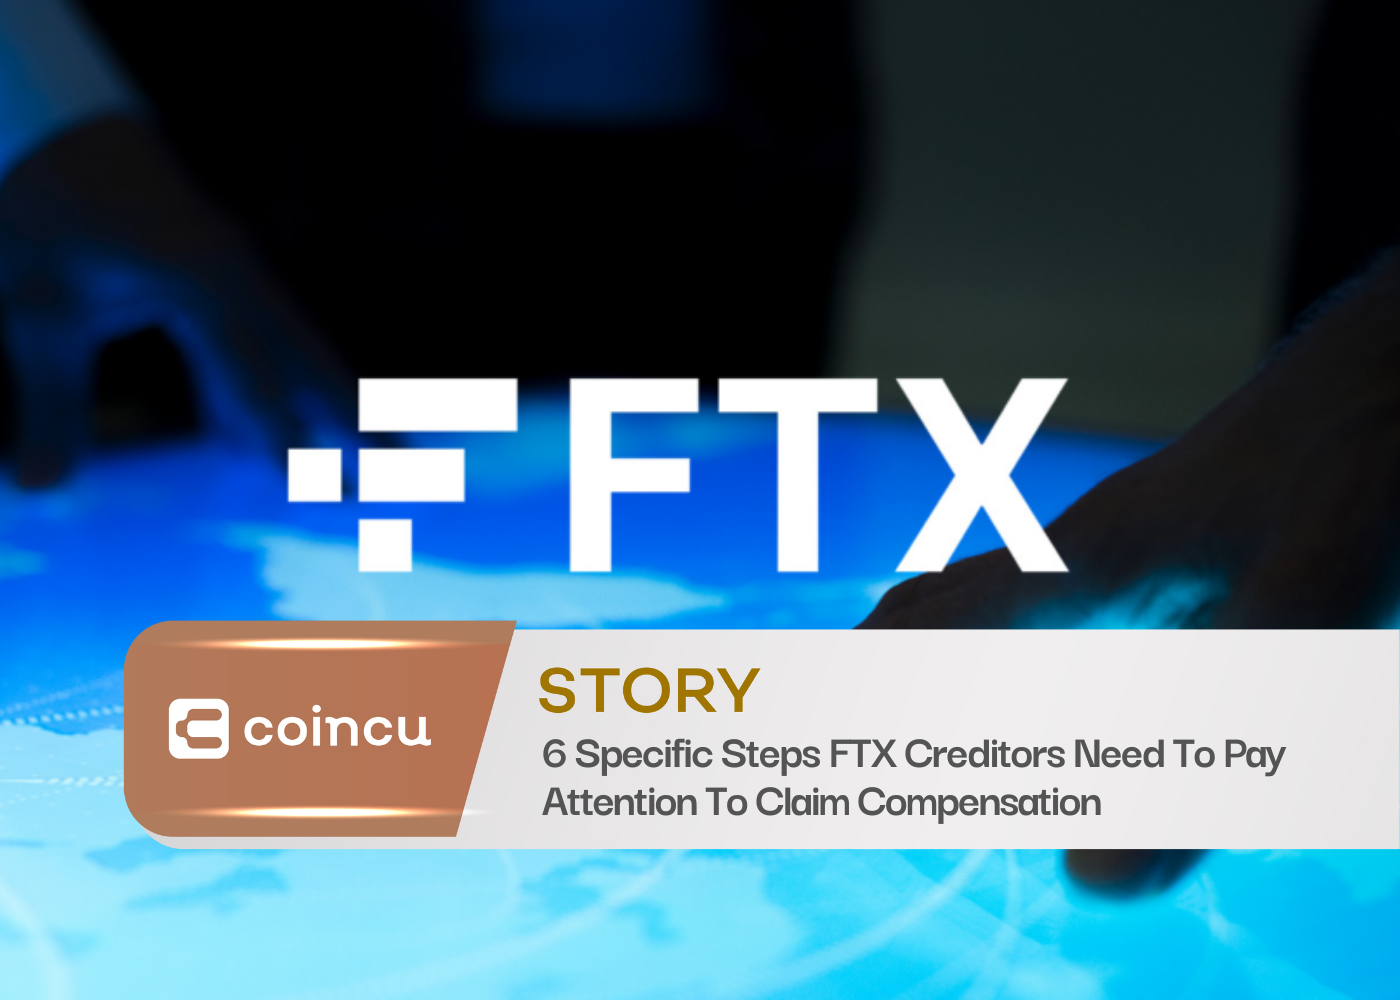 6 Specific Steps FTX Creditors Need To Pay Attention To Claim Compensation